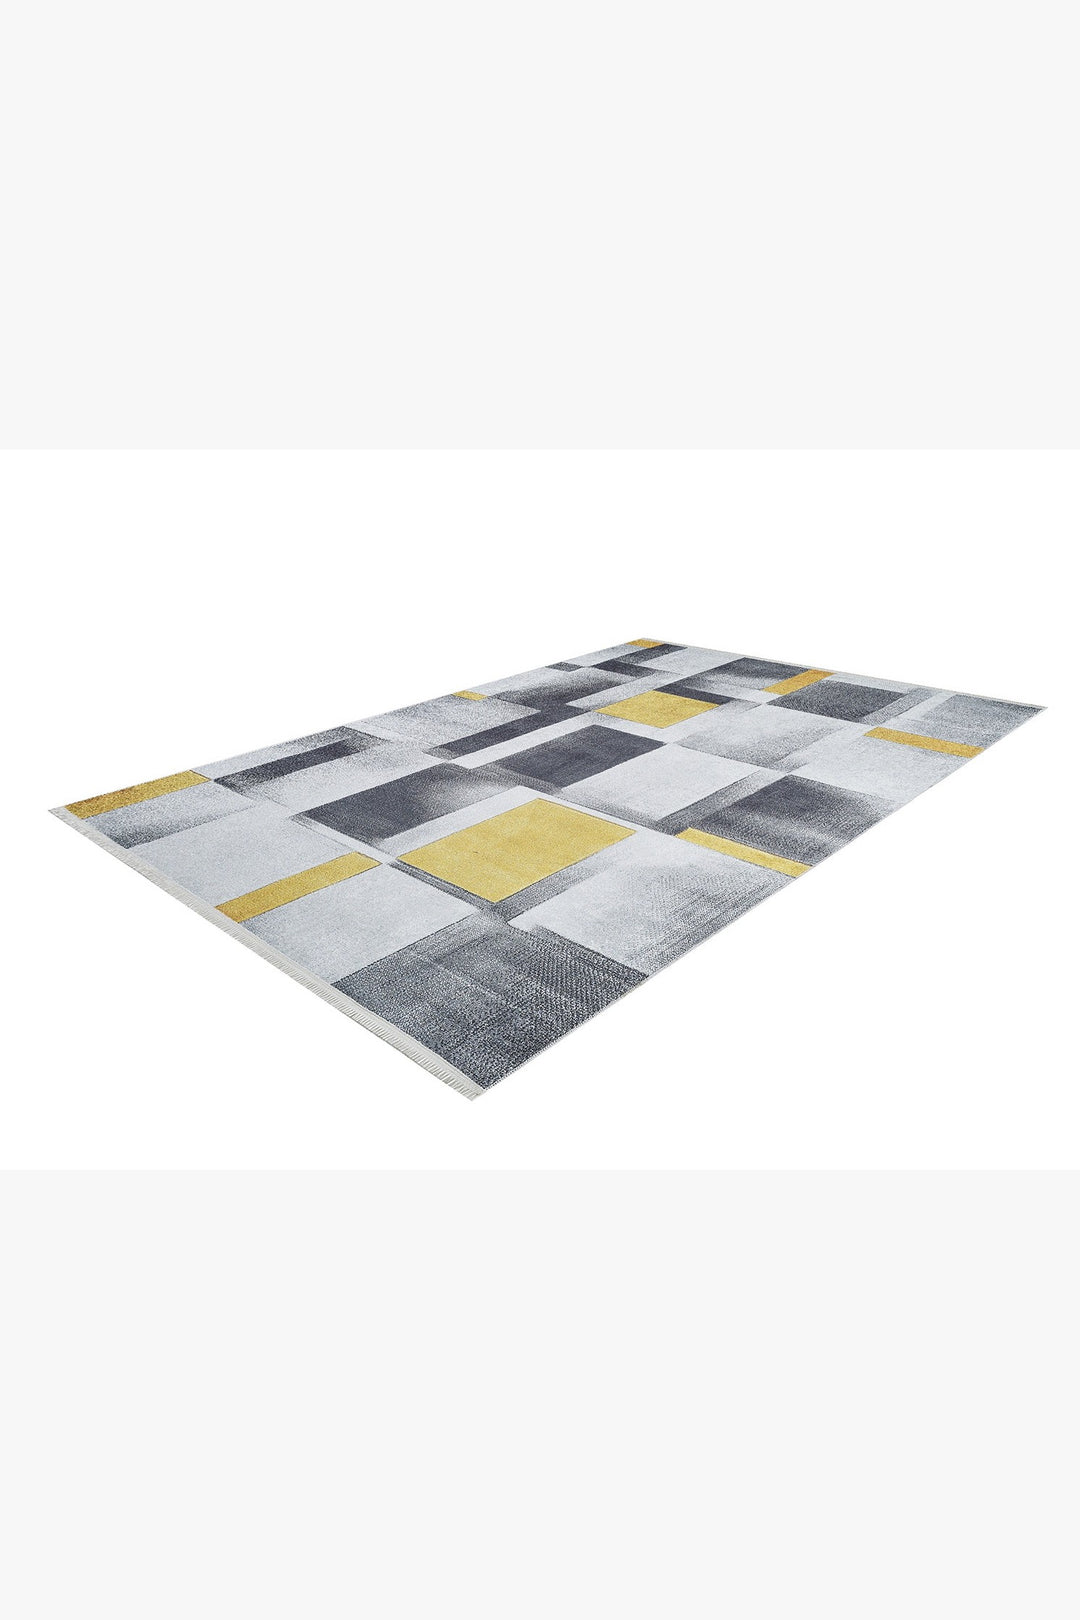 machine-washable-area-rug-Plaid-Modern-Collection-Gray-Anthracite-Yellow-Gold-JR1575